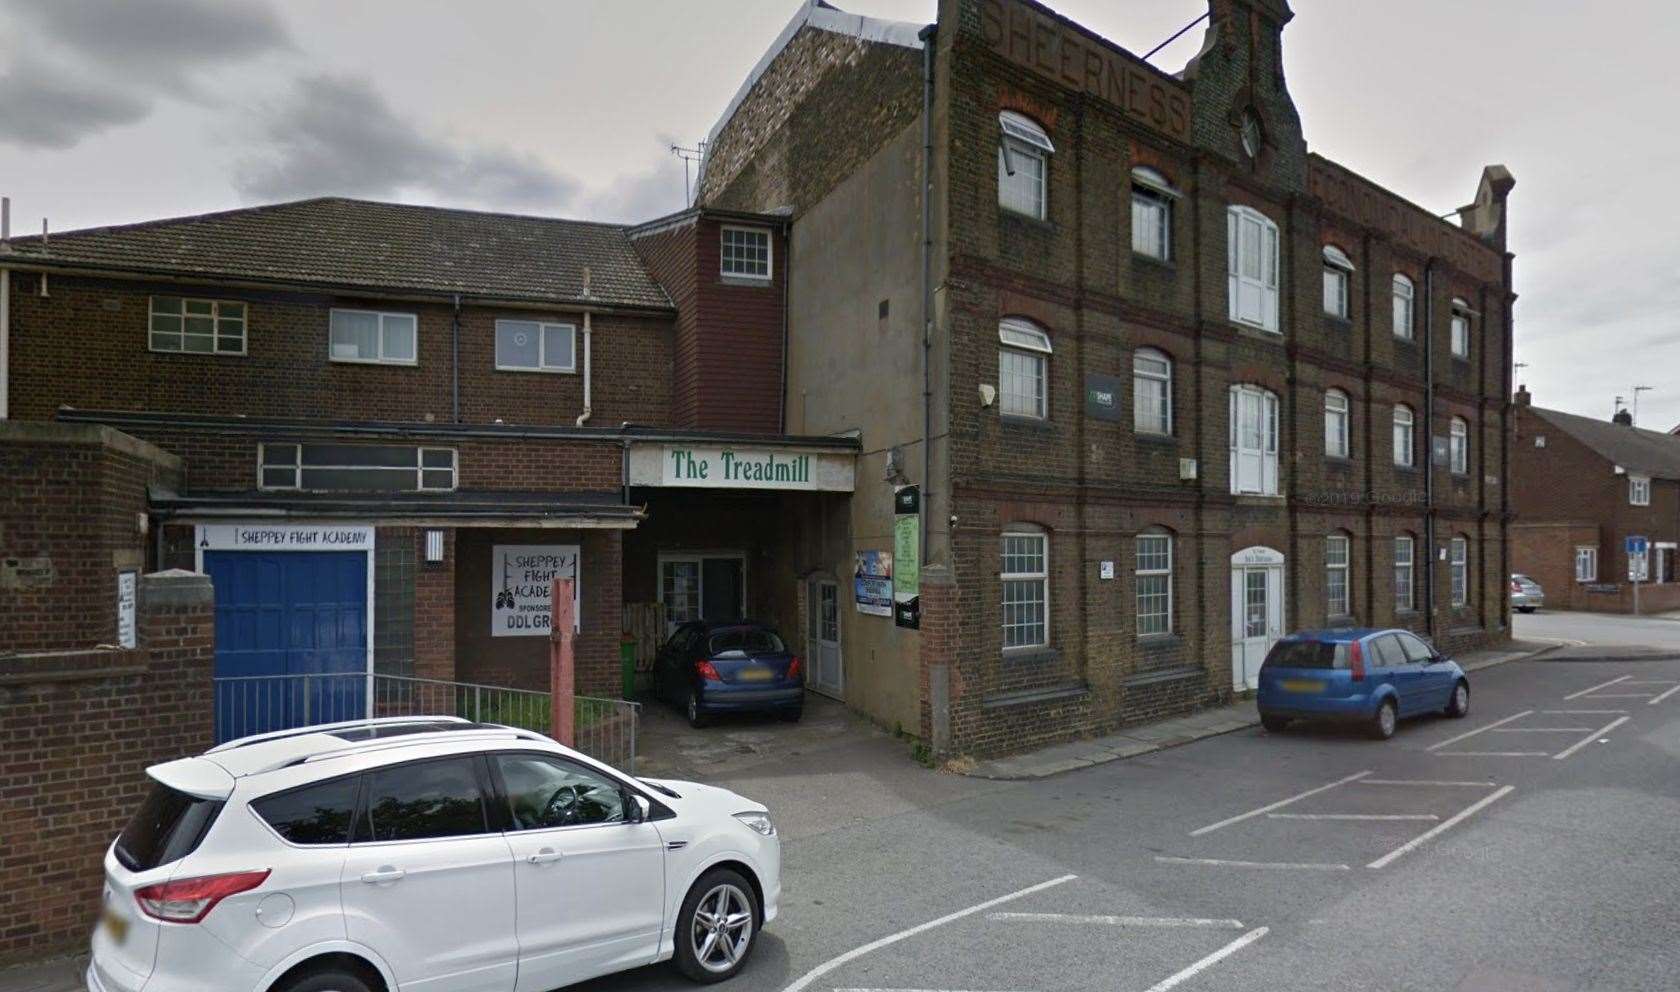 Scaffolding was removed and stolen from The Treadmill gym in Railway Road, Sheerness. Picture: Google Maps